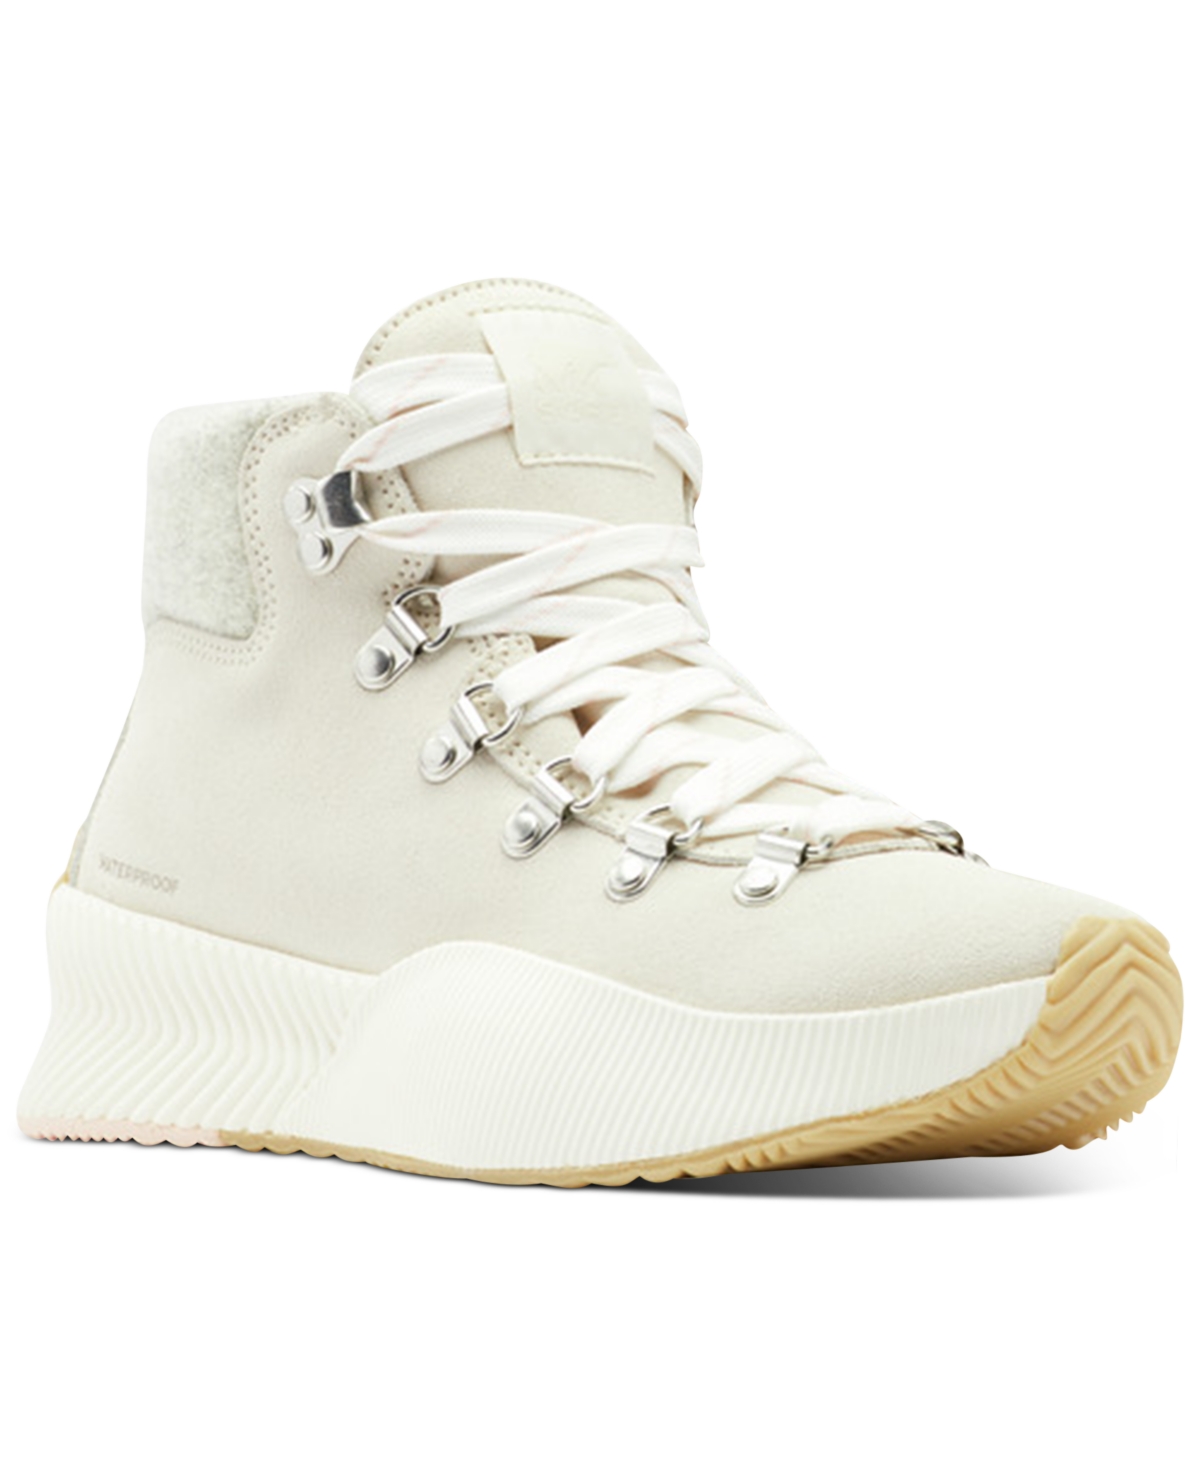 SOREL Out N' About III Conquest Waterproof Boot in Chalk Sea Salt at ...